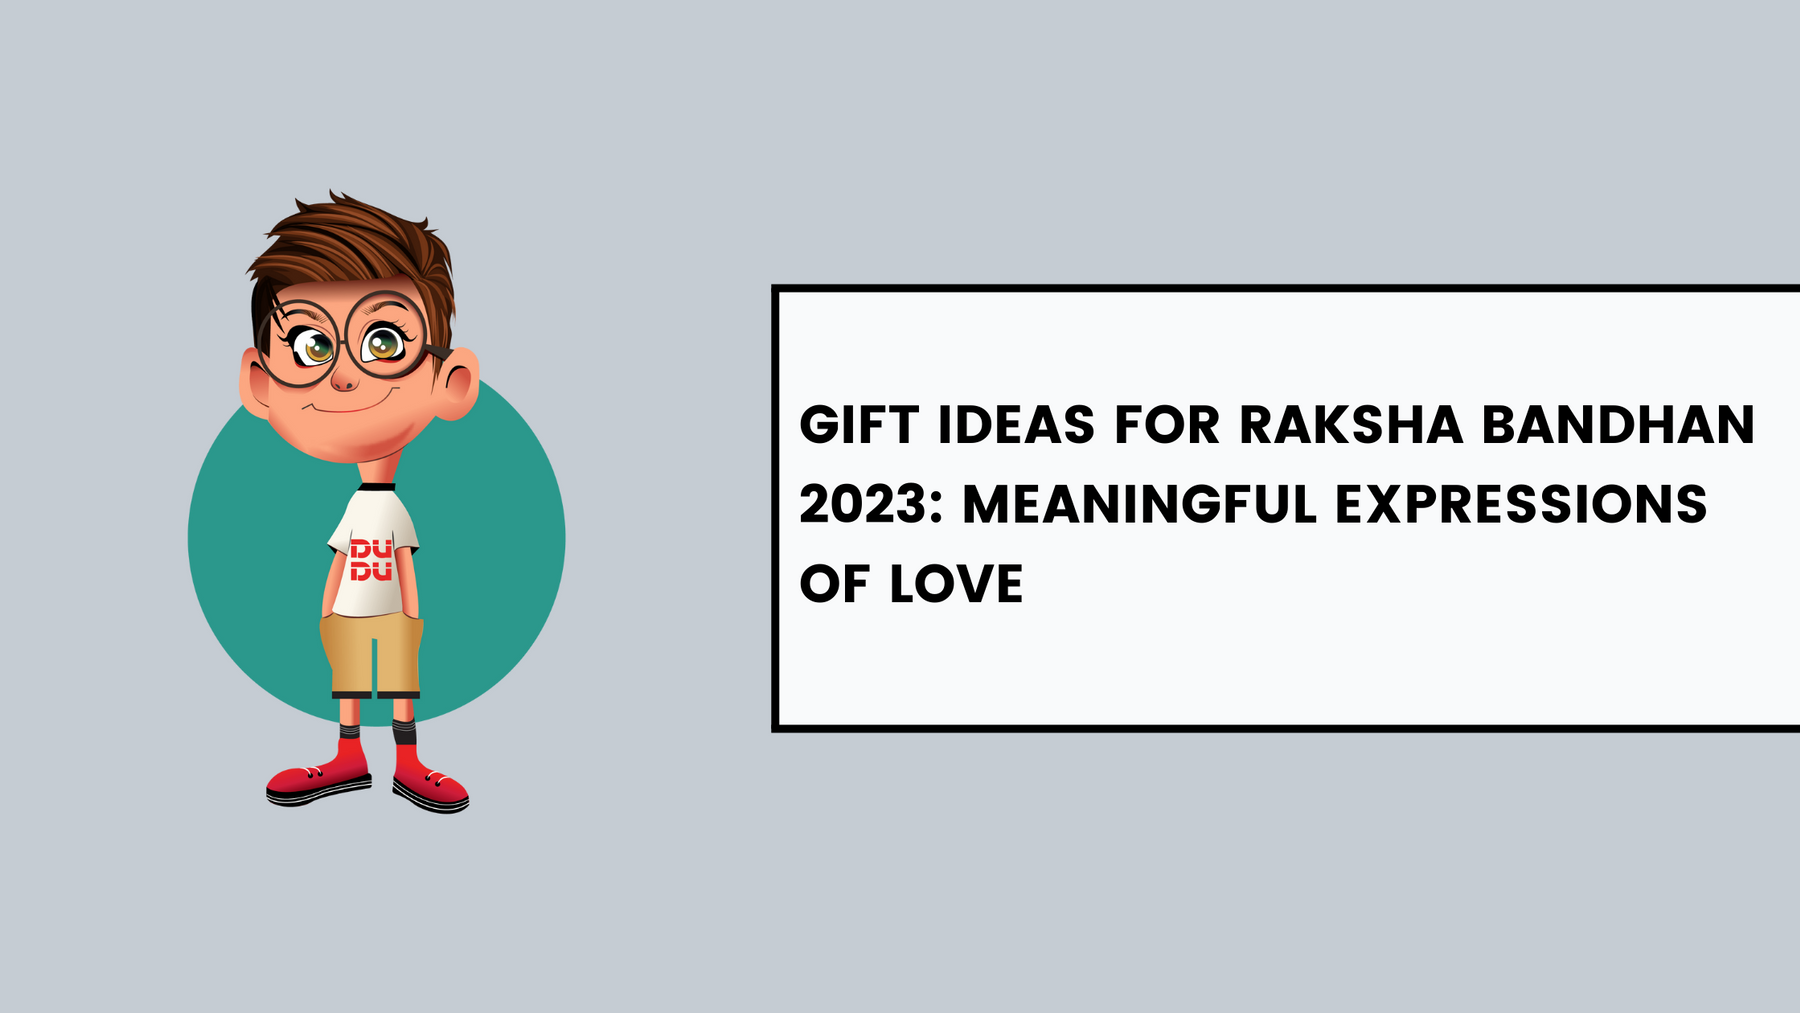 Gift Ideas for Raksha Bandhan 2023: Meaningful Expressions of Love